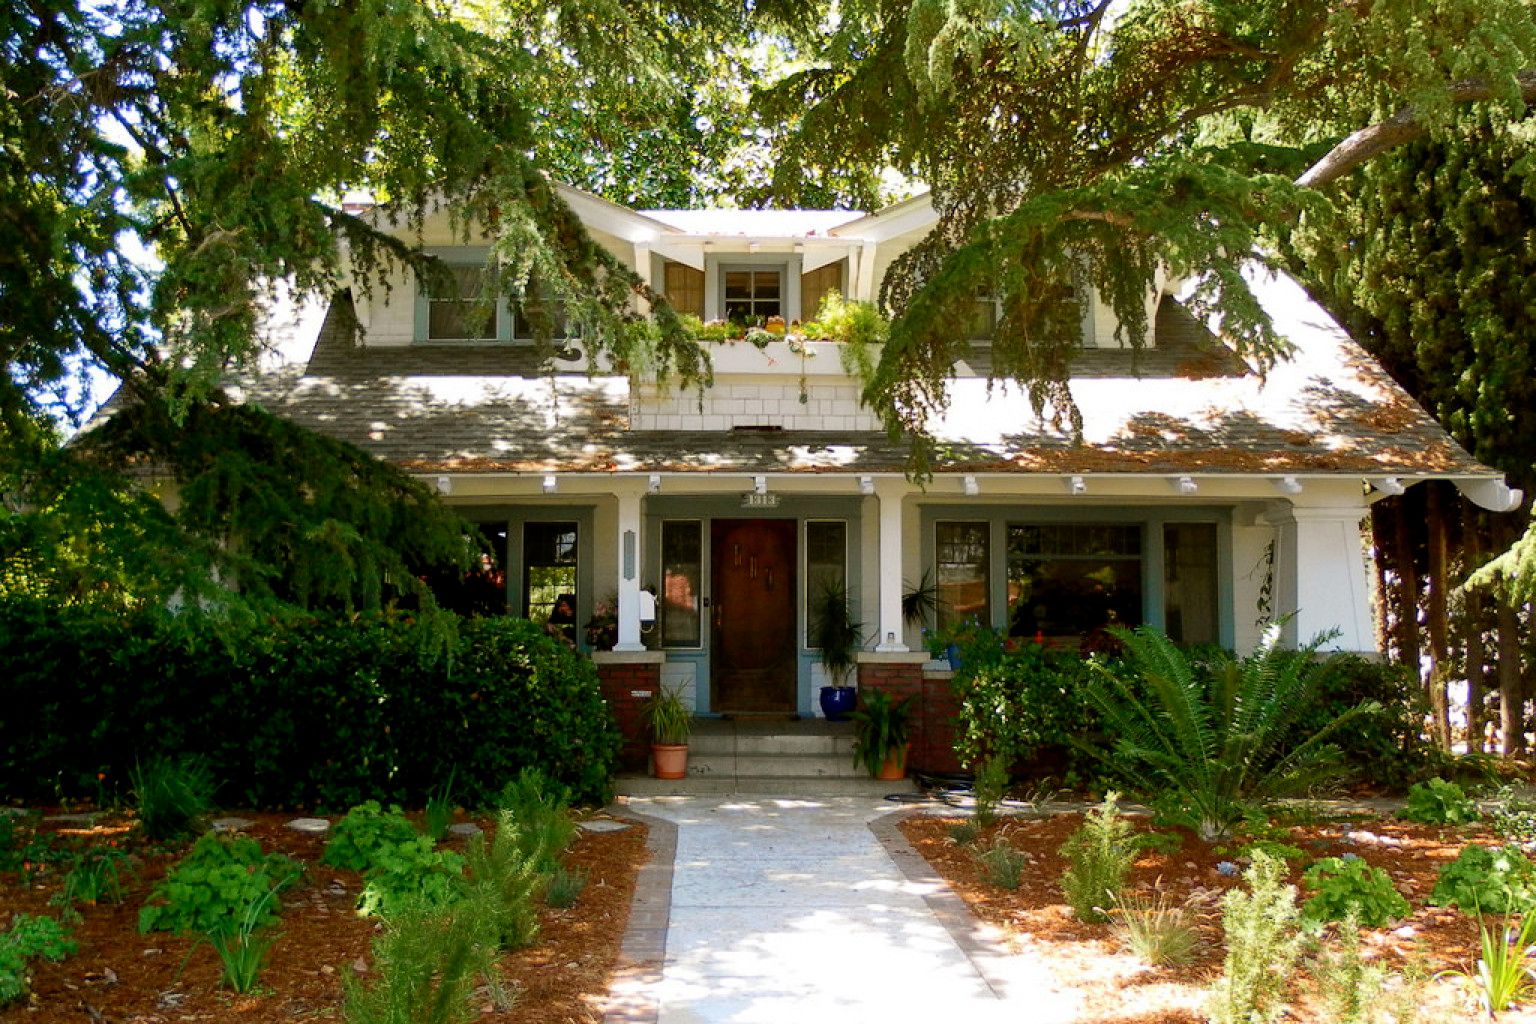 Have You Ever Wondered How Much Famous TV Homes From Your Favorite Shows Cost In Real Life?